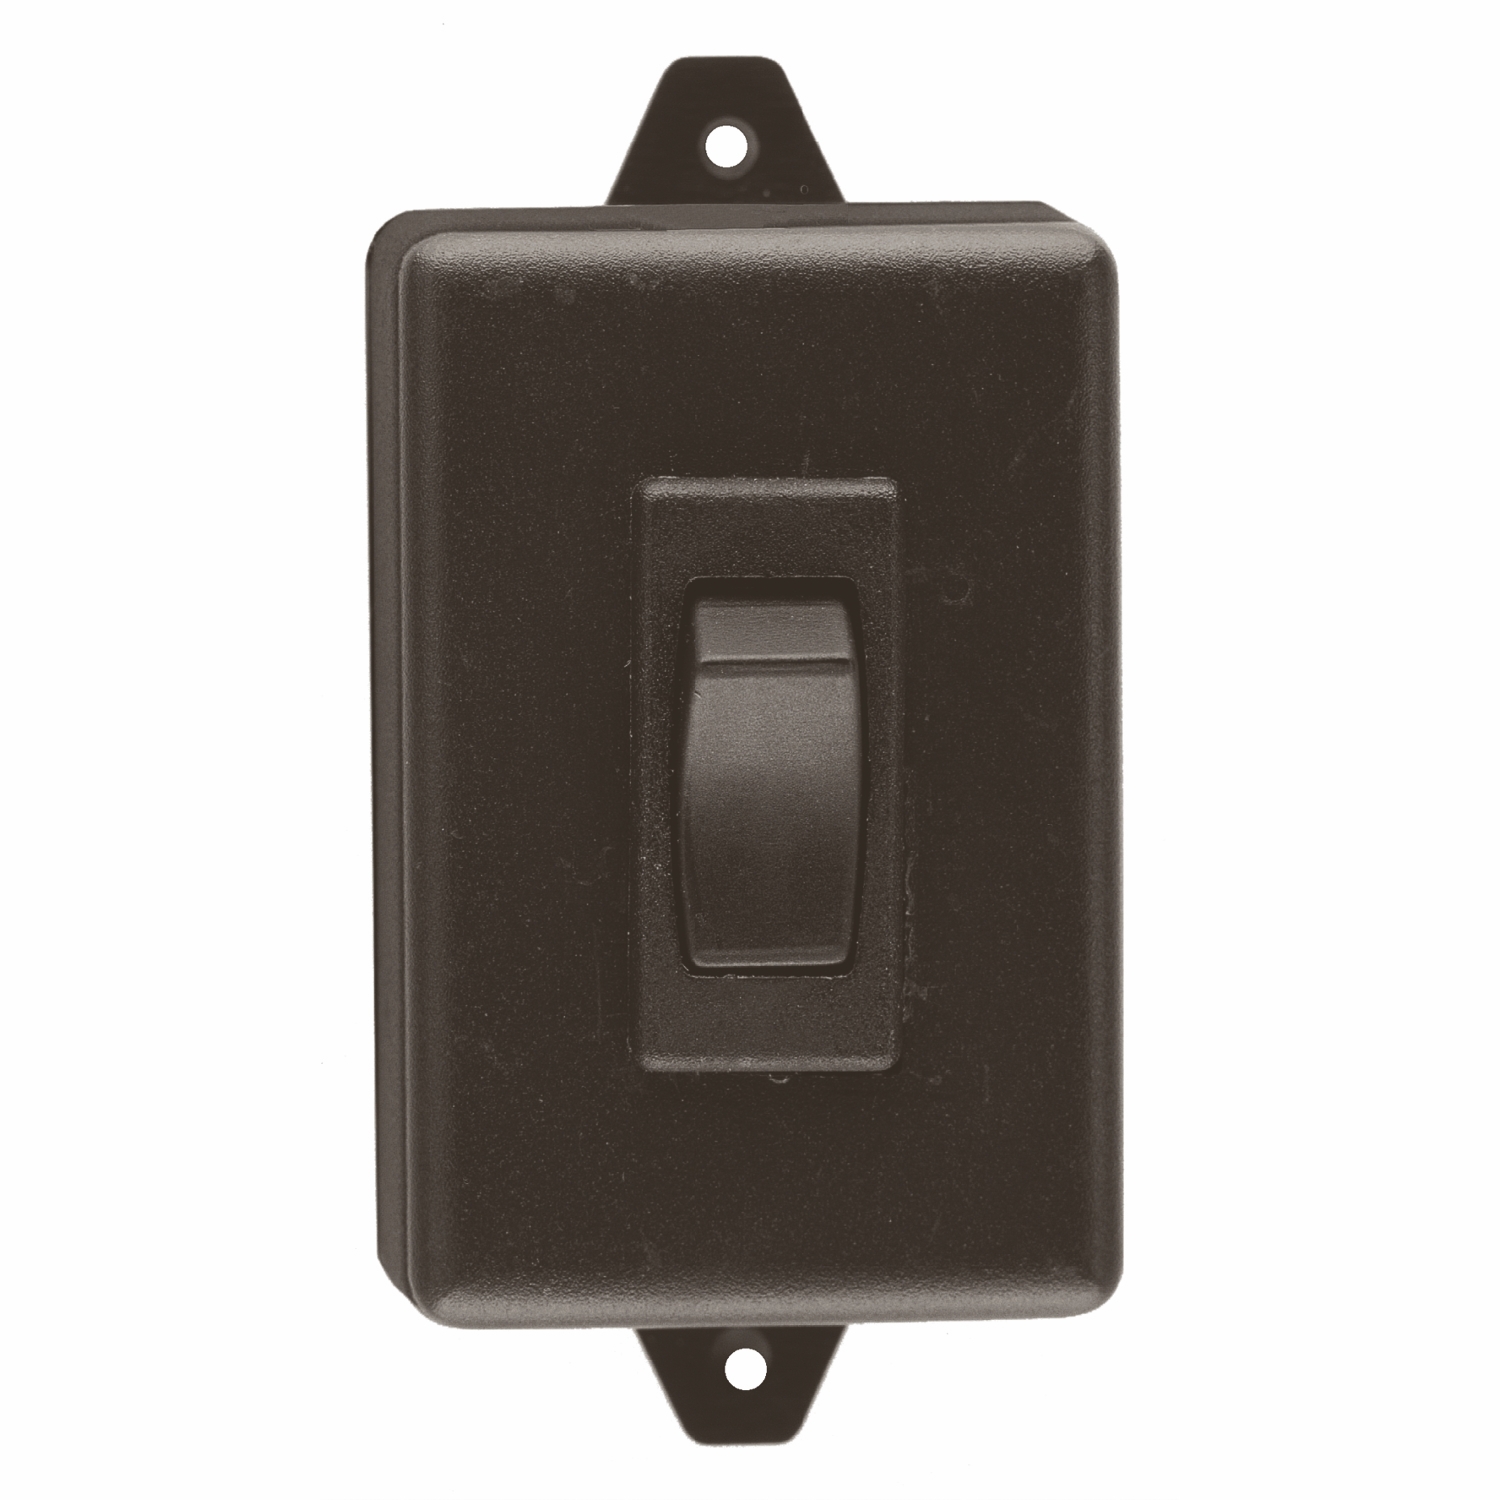 CM-400 Series: 1-5/8" Pushbutton, Stainless Steel Faceplate - Mushroom Push Buttons - Activation